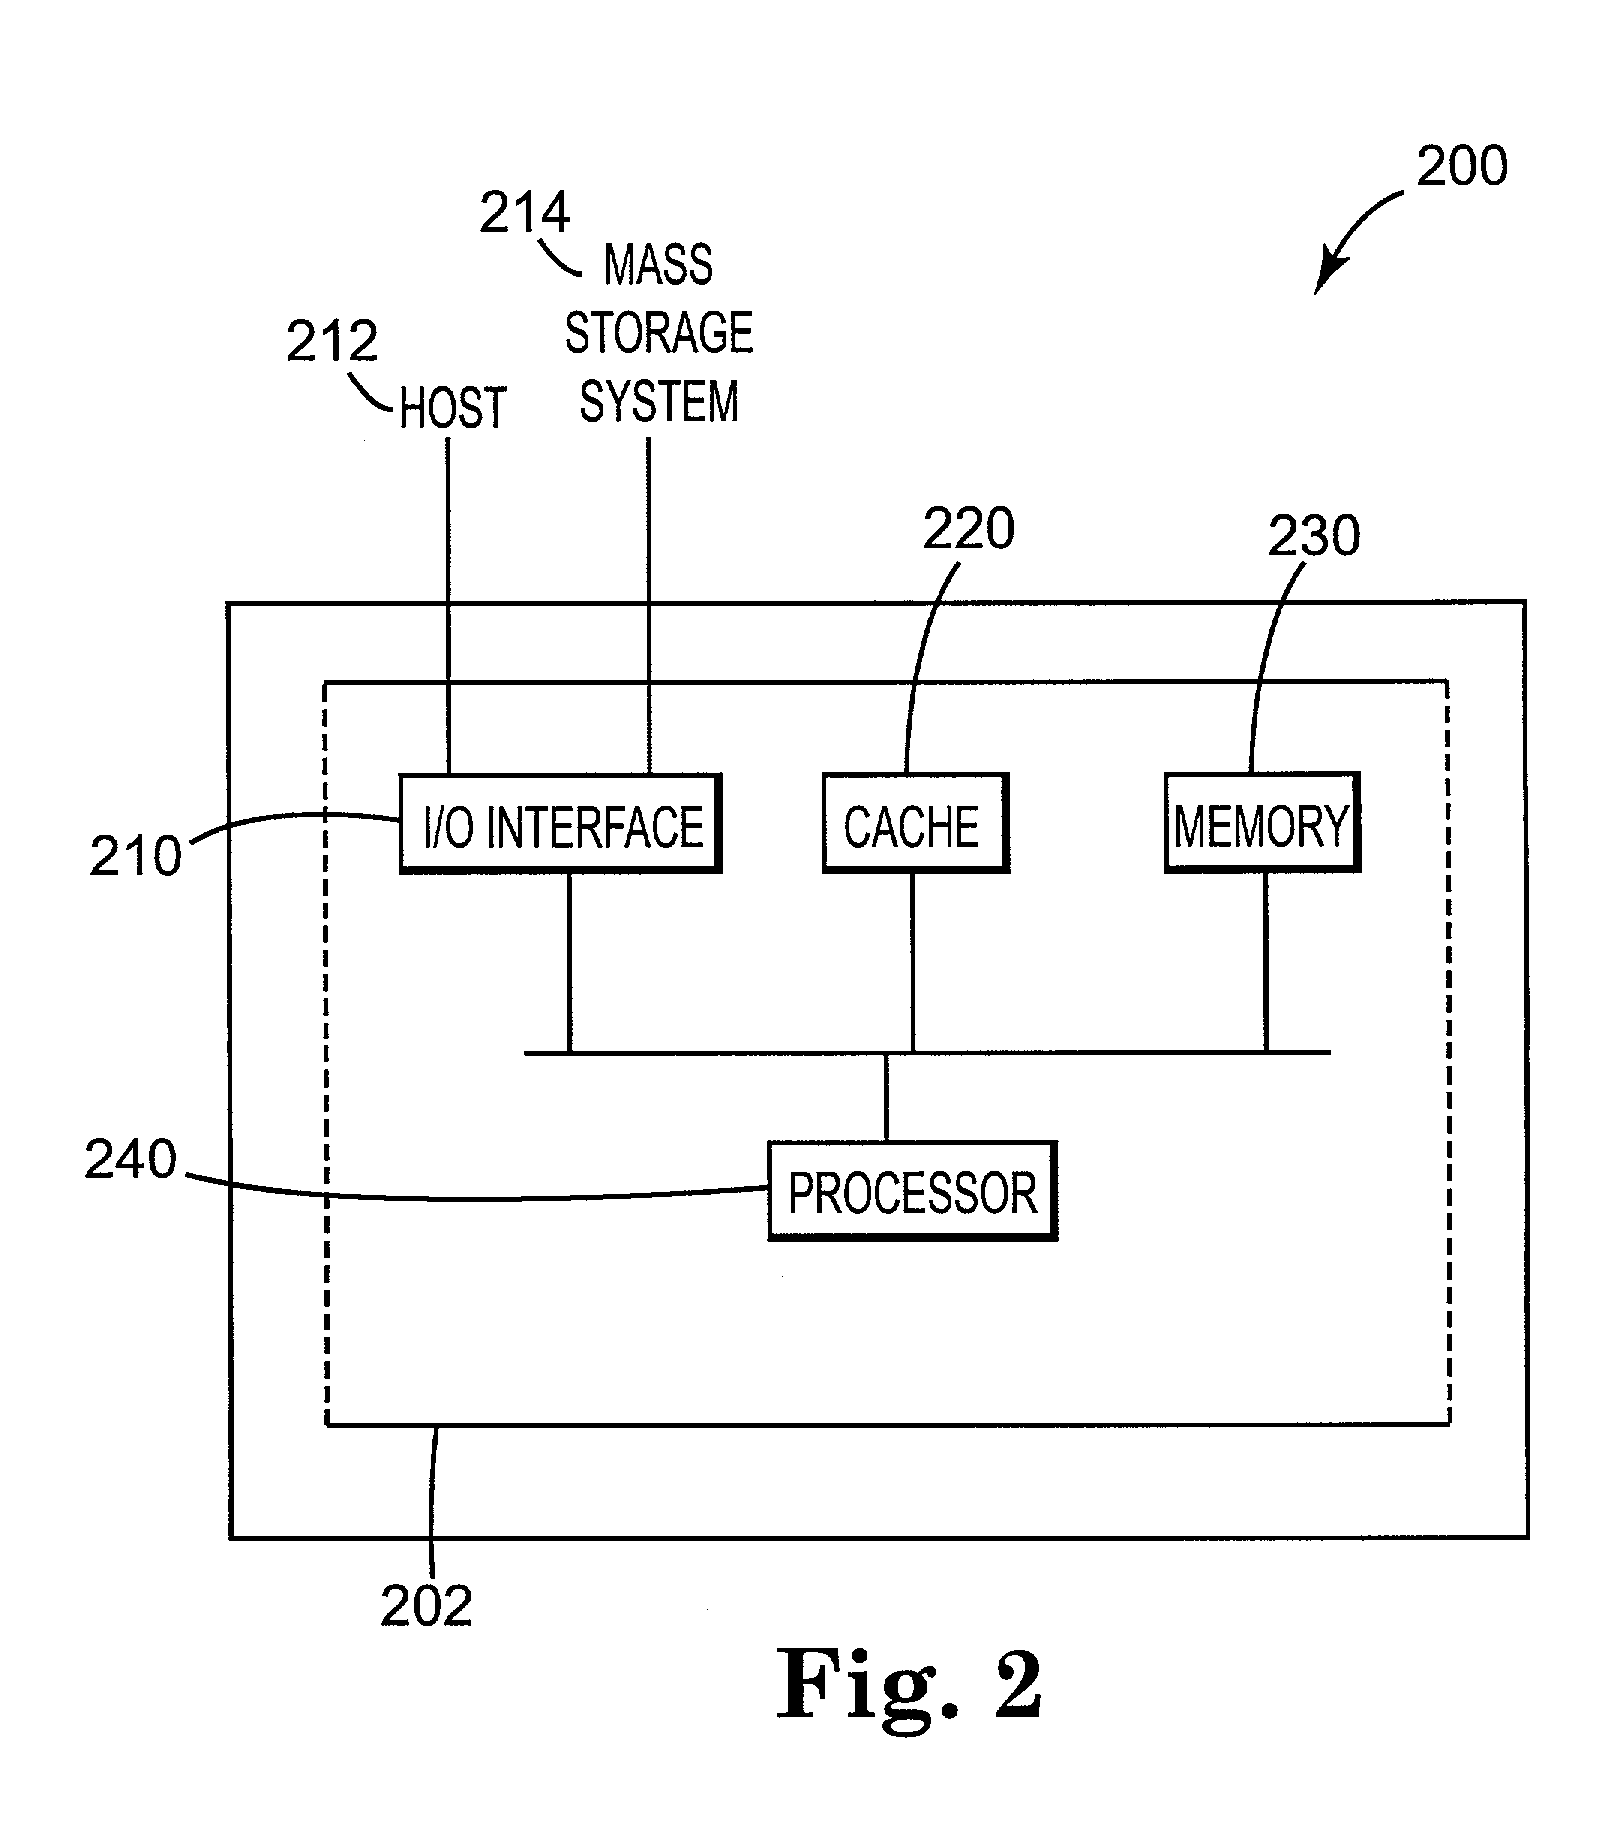 Apparatus for reducing the overhead of cache coherency processing on each primary controller and increasing the overall throughput of the system